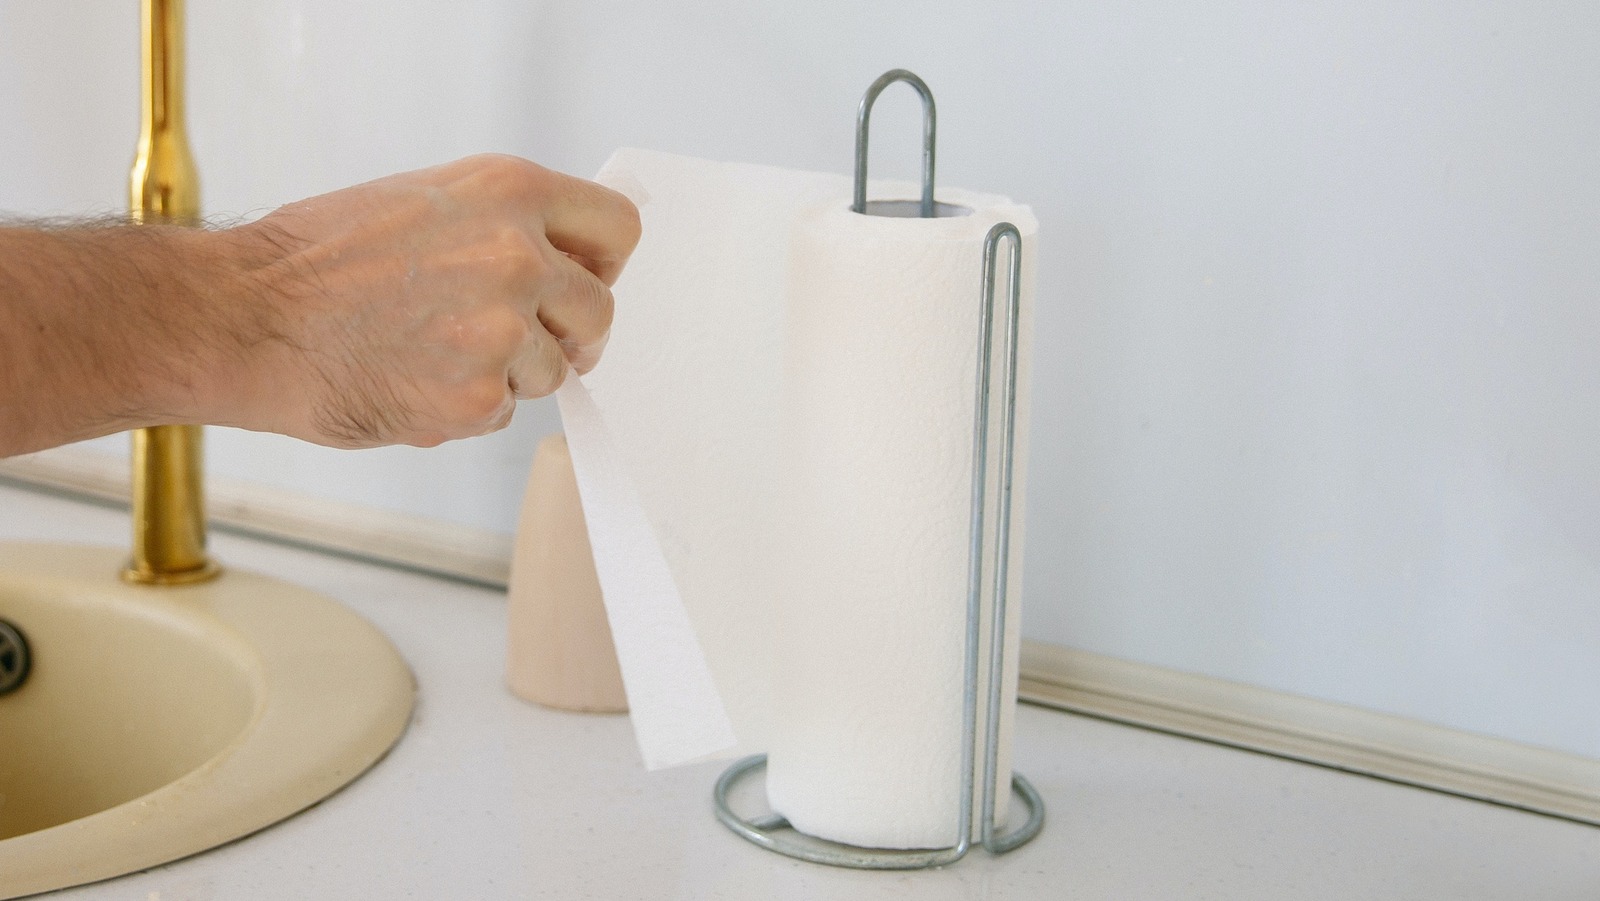 Common Things You Shouldn't Clean With A Paper Towel